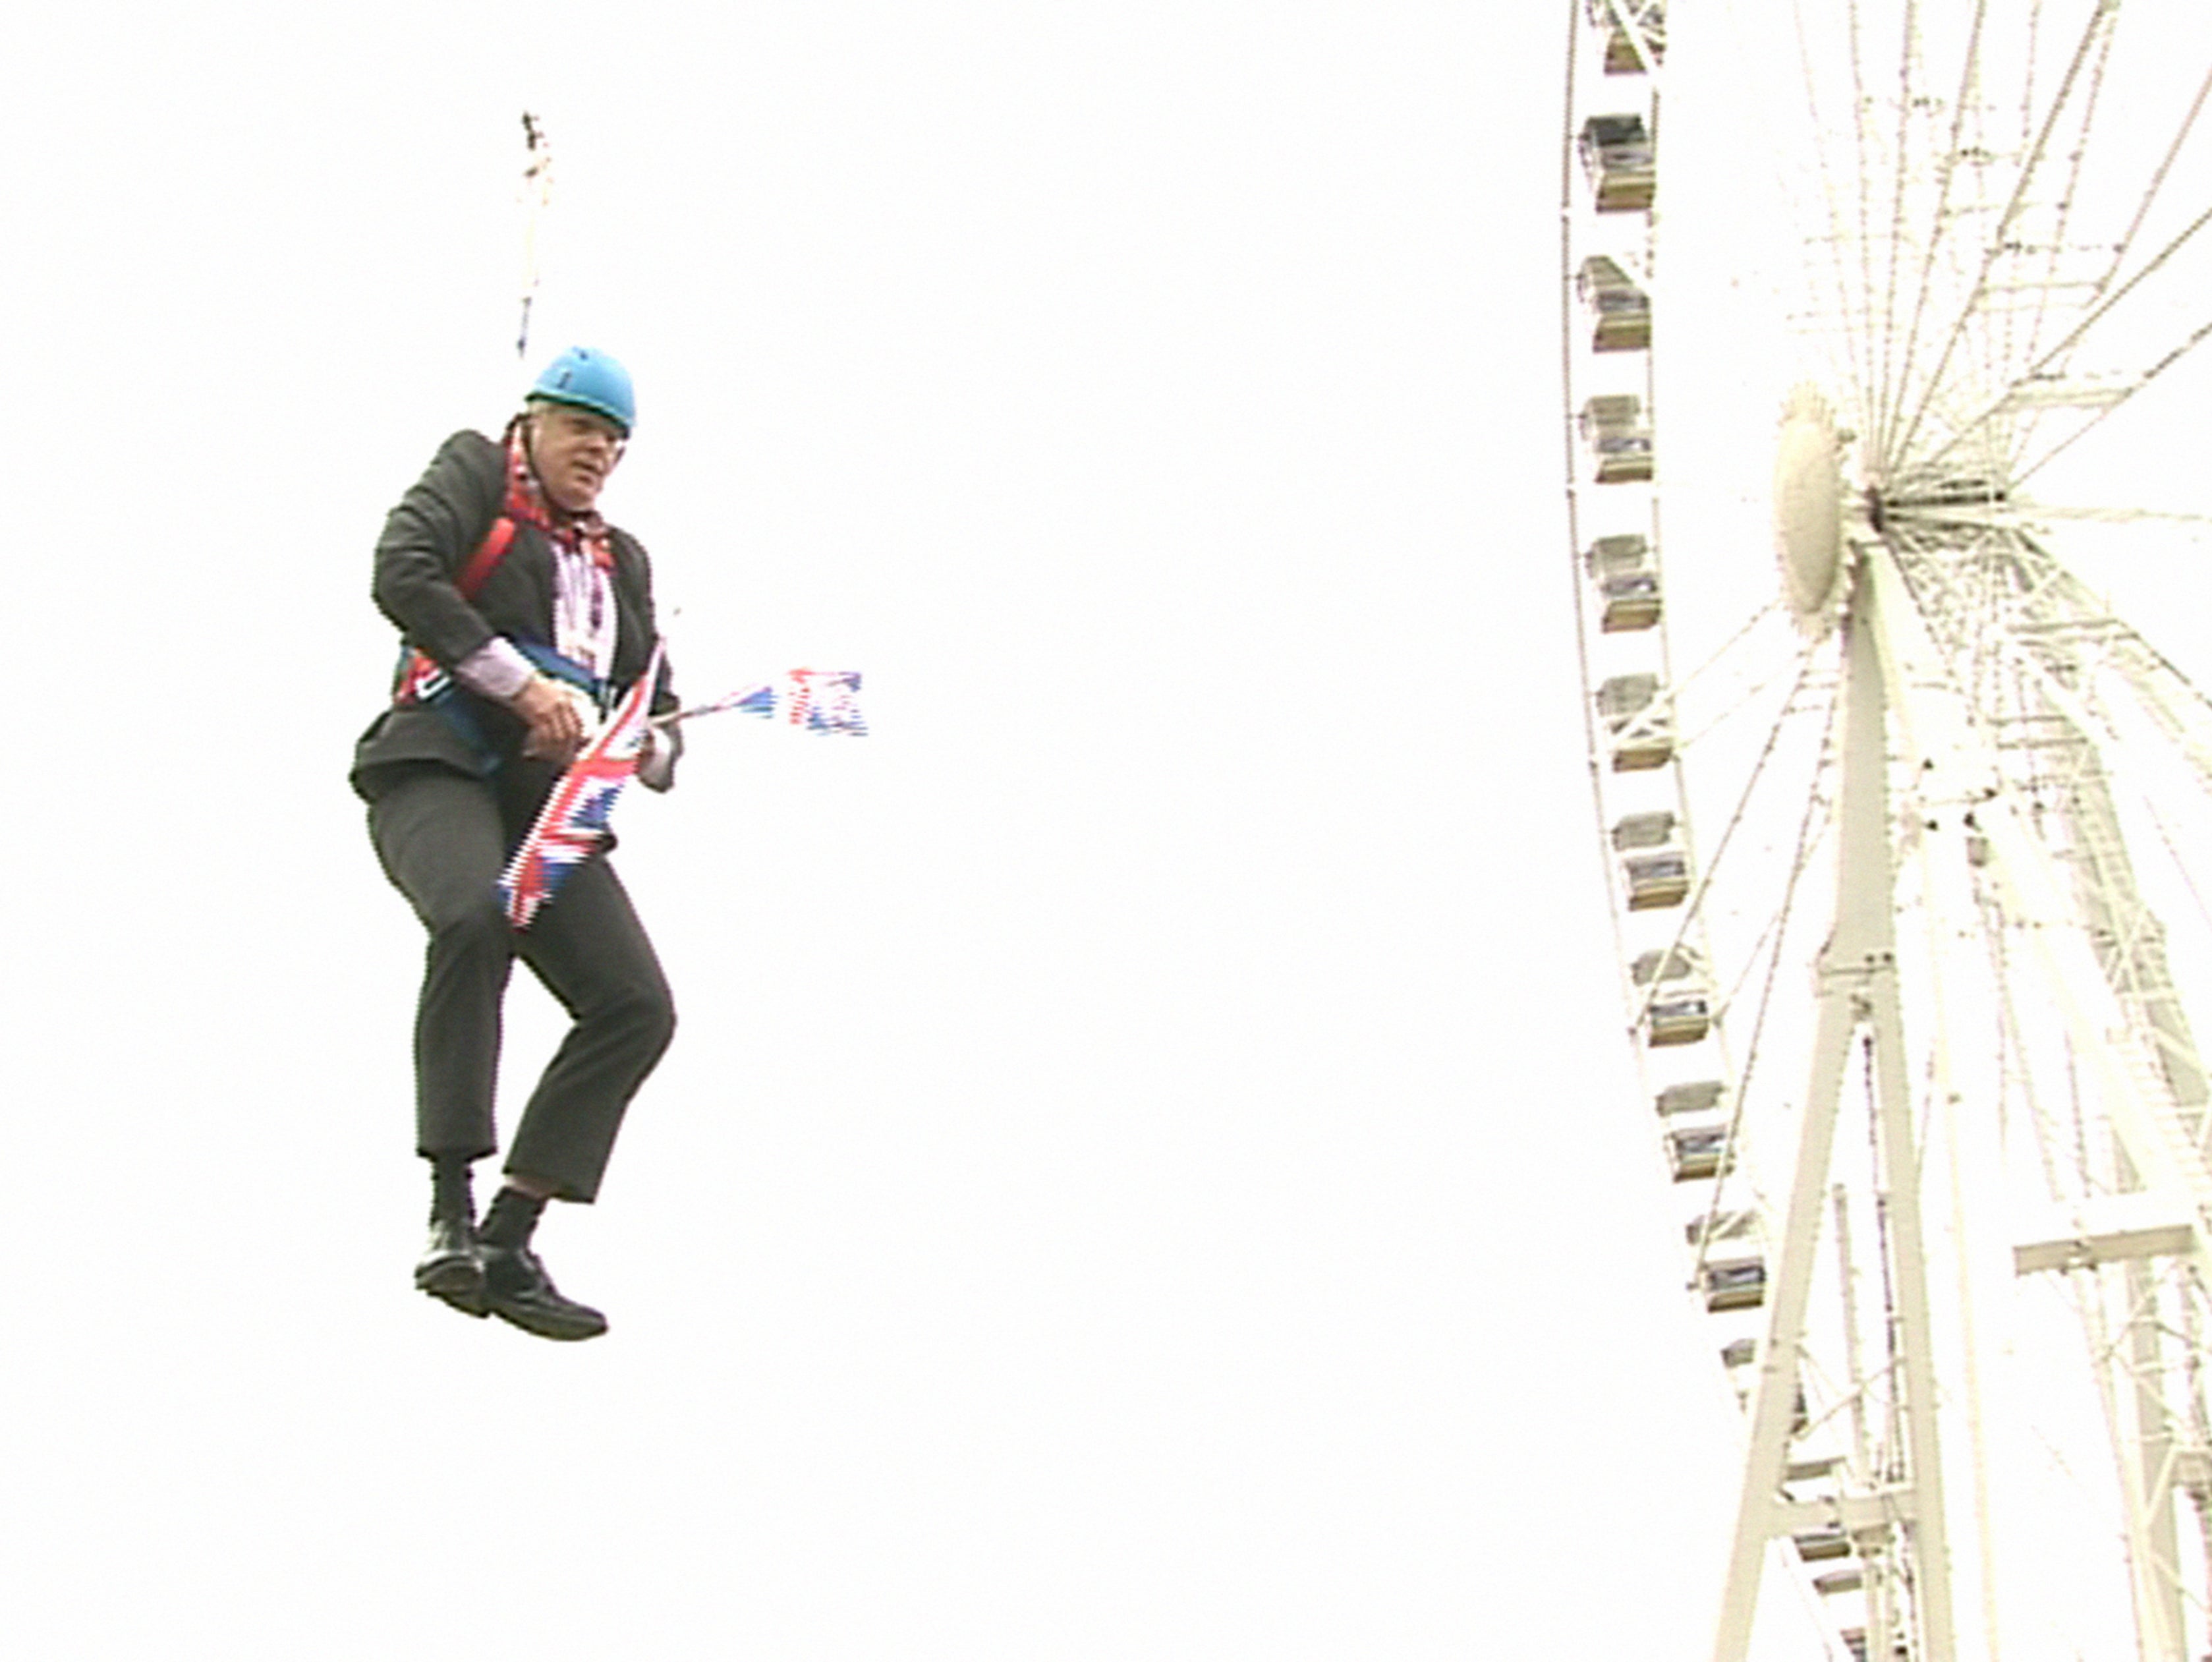 Boris Johnson, the then London mayor, clutches two flags after he was left hanging in mid-air when he got stuck on a zipwire at an Olympic event at Victoria Park